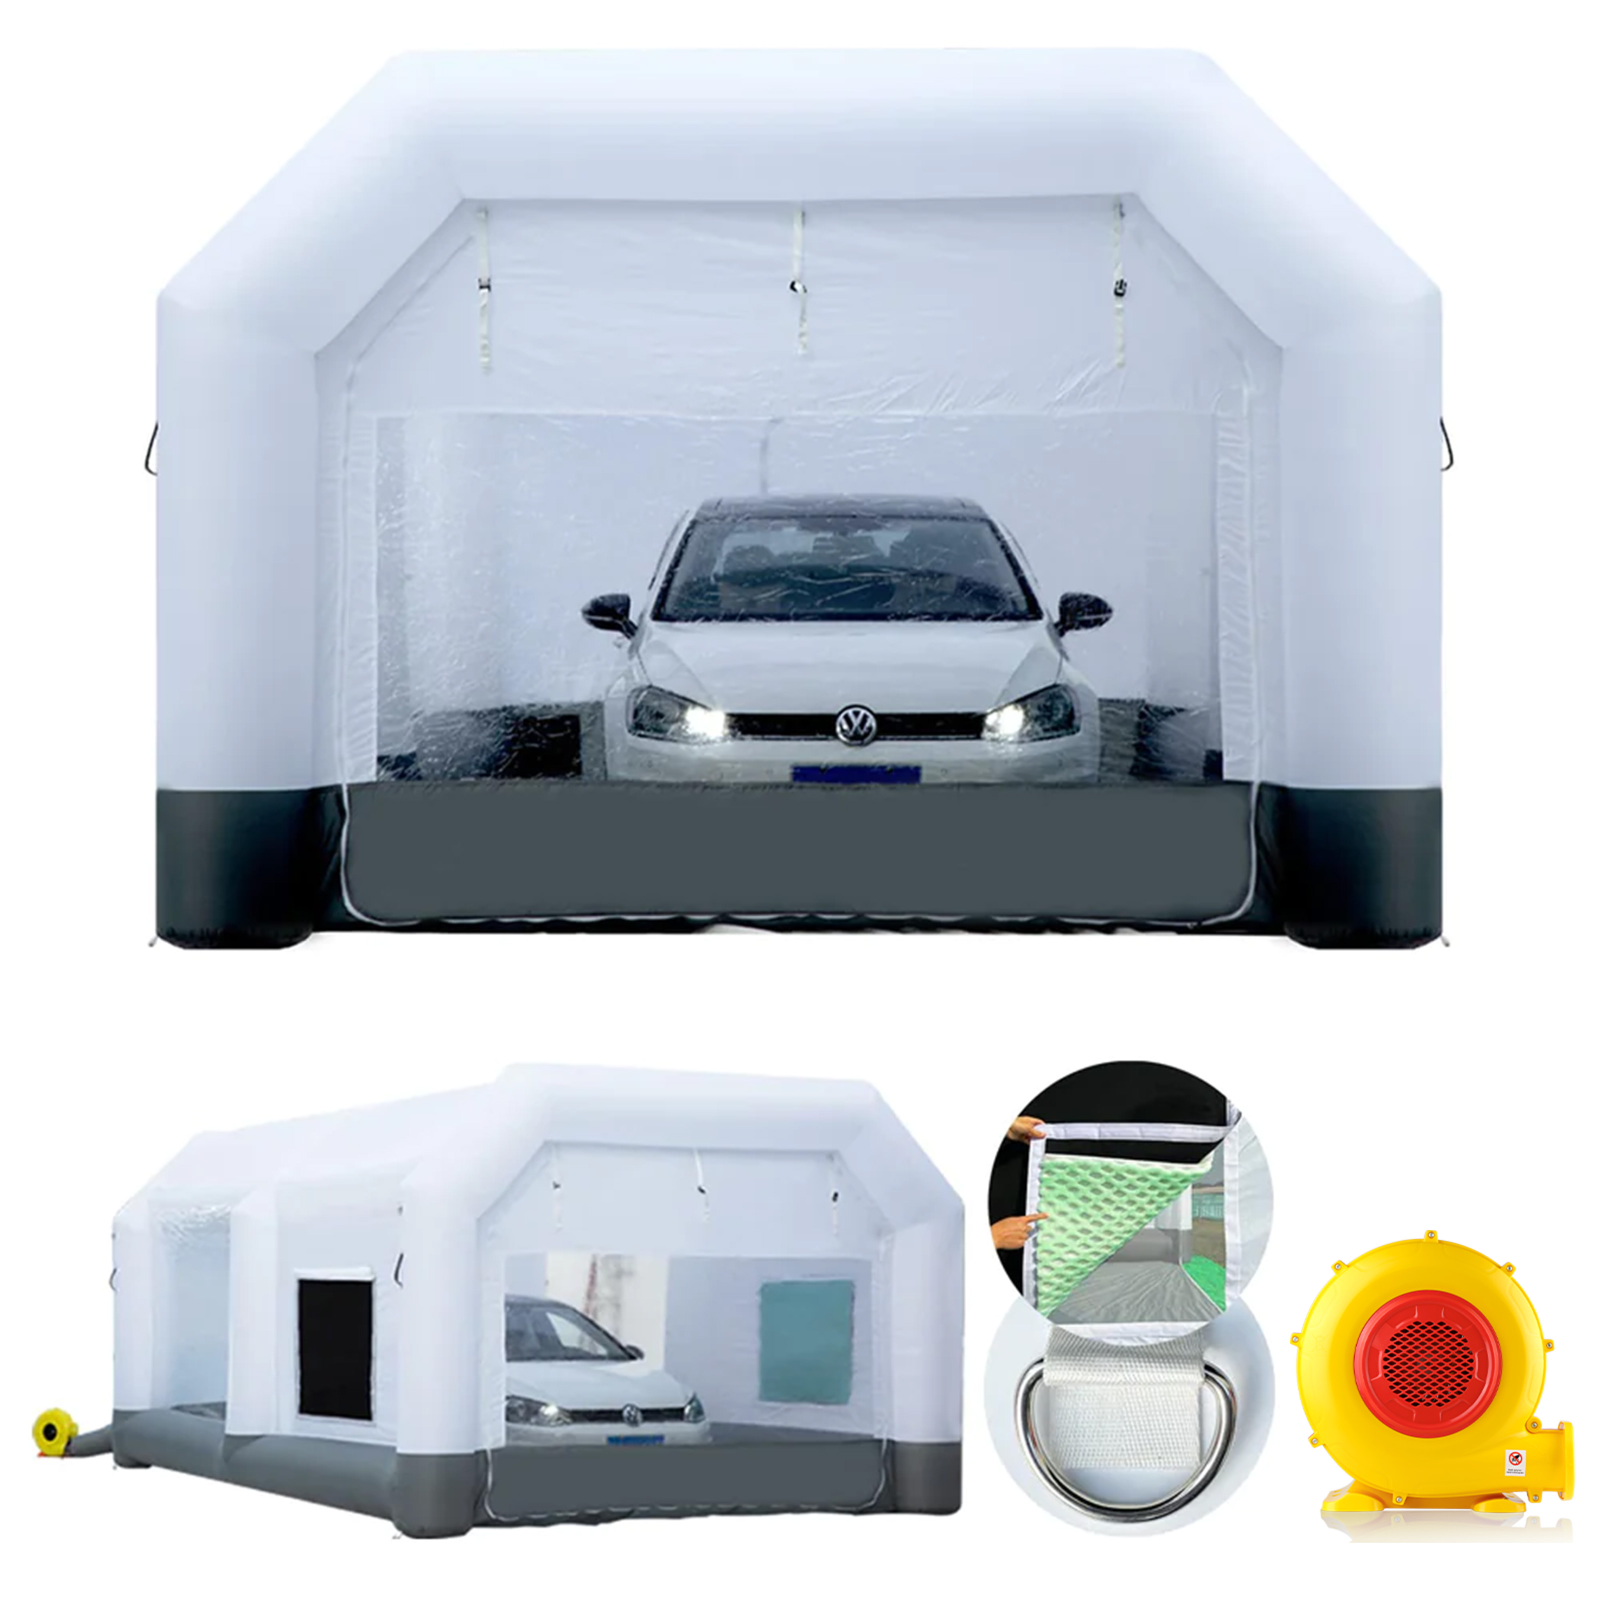 Sewinfla Professional Inflatable Paint Booth 23x20x14.5Ft with Blowers  Upgrade Inflatable Spray Booth More Durable Portable Car Painting Booth  Tent with Air Filter System